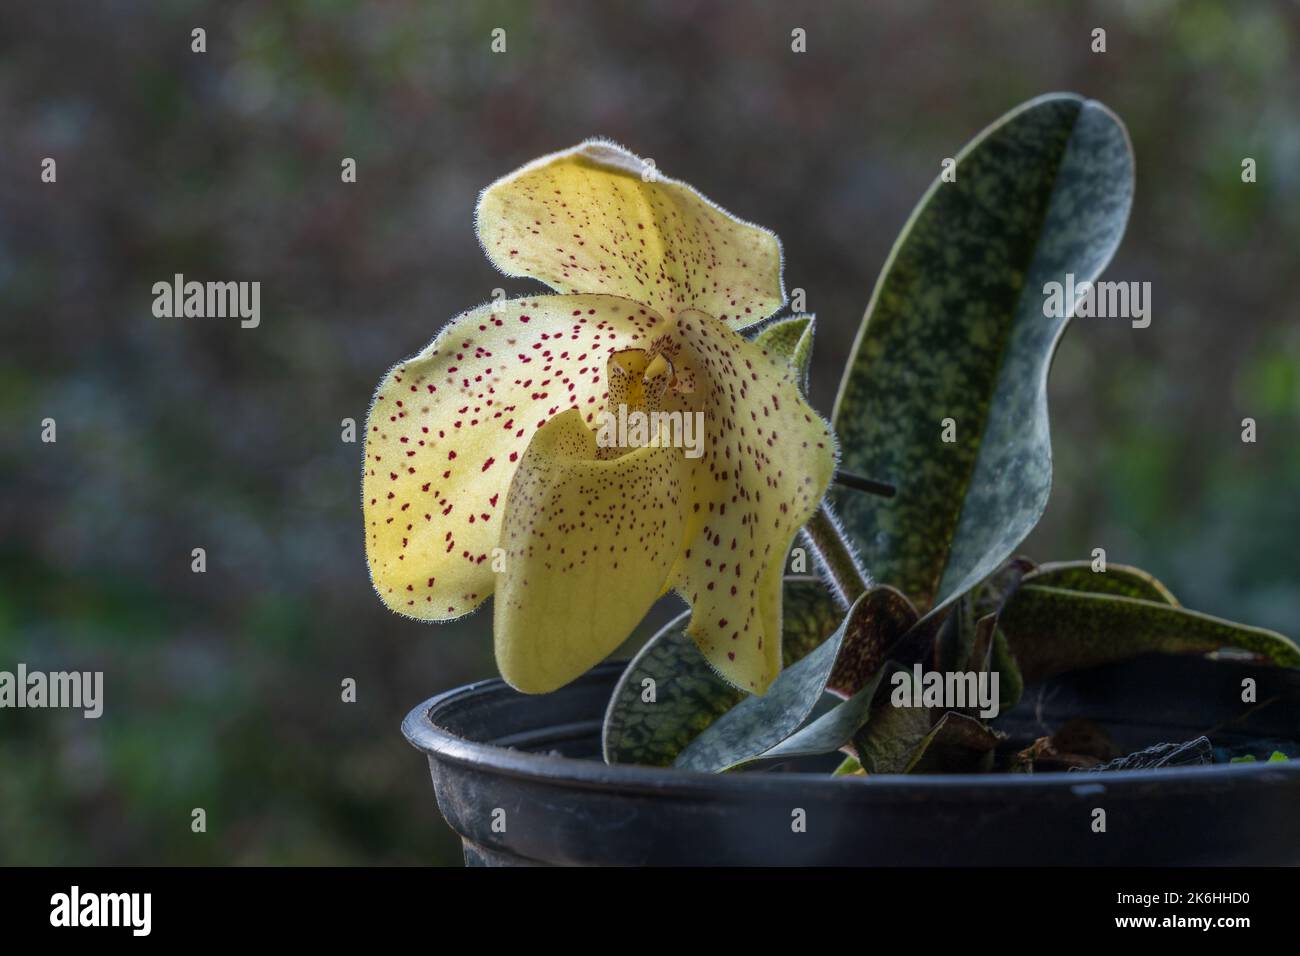 Closeup view of beautiful backlit yellow flower of lady slipper orchid species paphiopedilum concolor on natural background Stock Photo